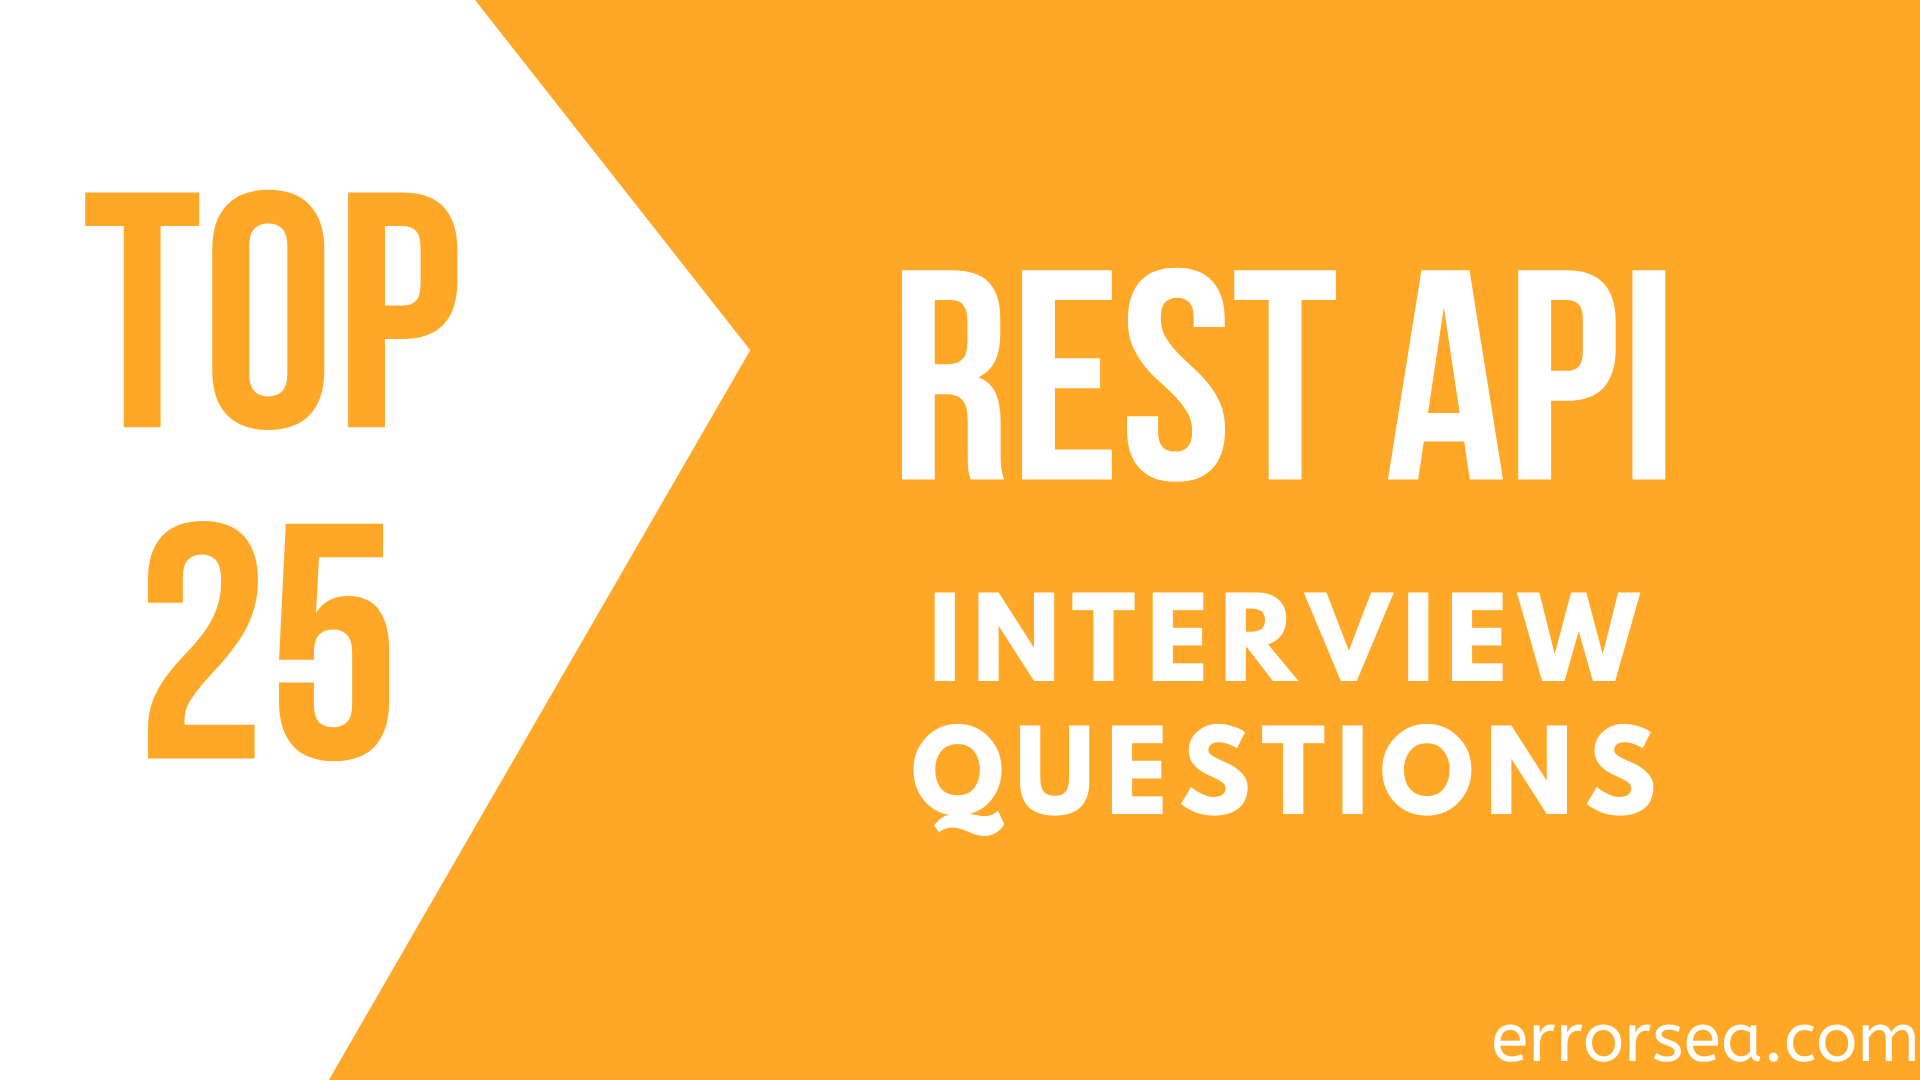 Top 25 REST API Interview Questions and Answers for Experienced (Download Free PDF)